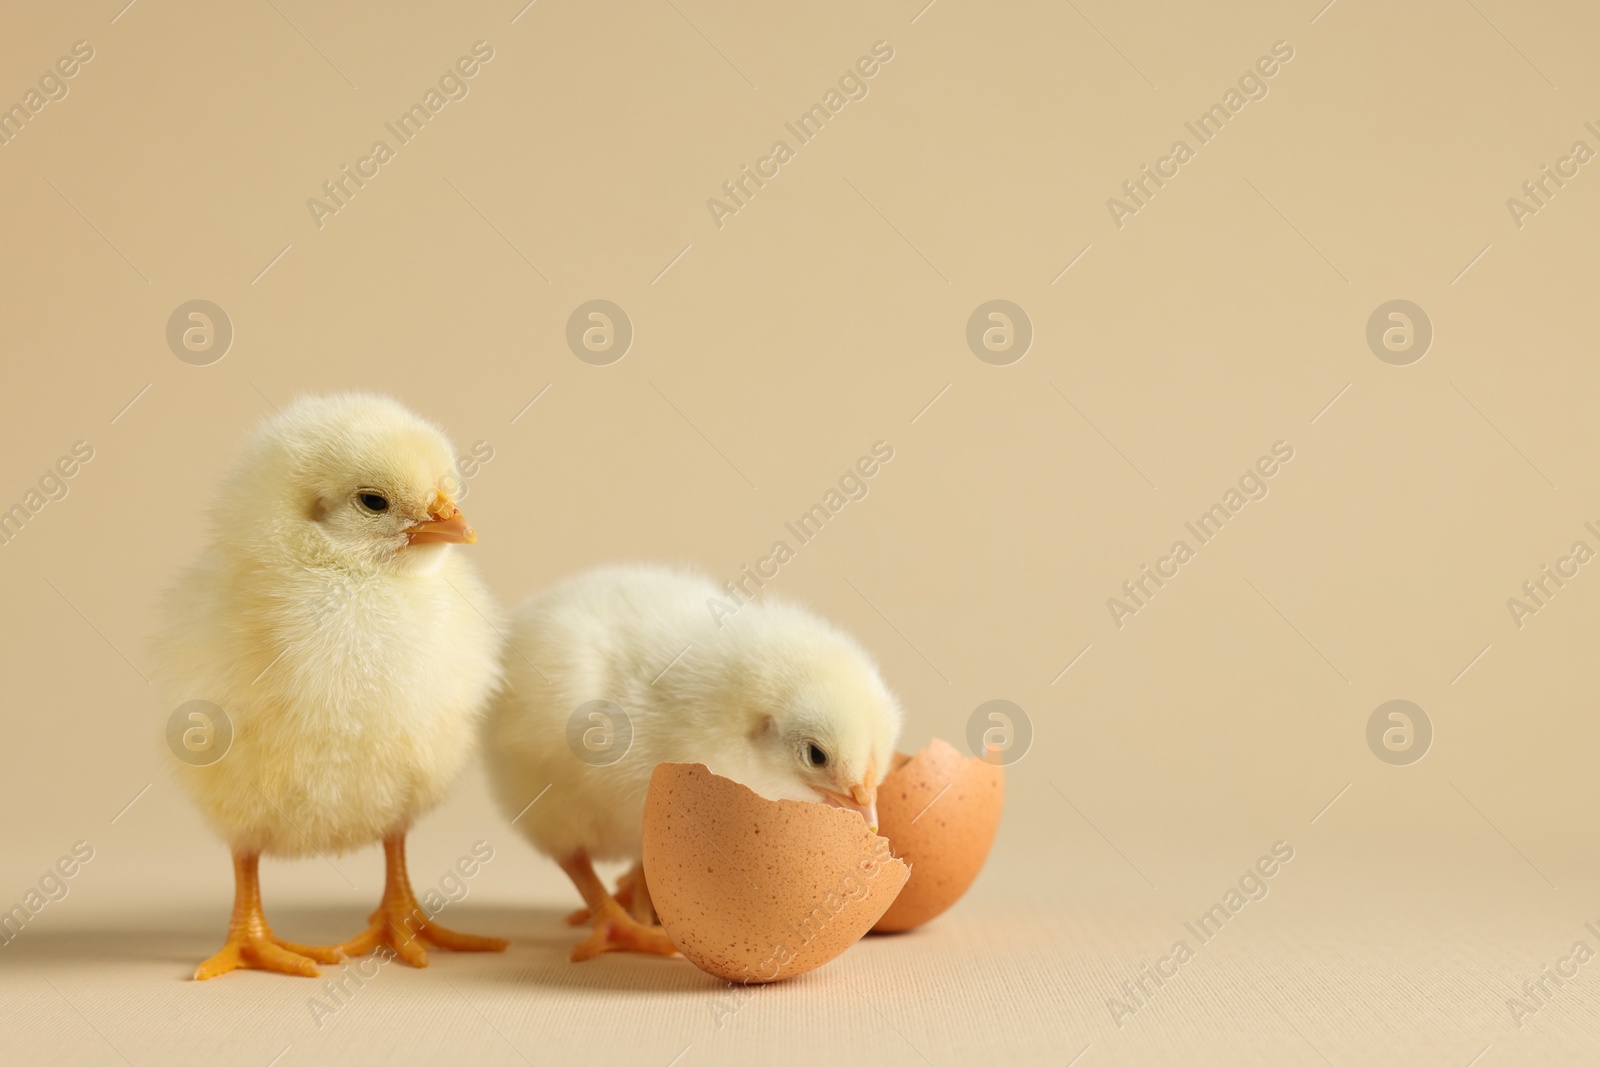 Photo of Two cute chicks and pieces of eggshell on beige background, closeup with space for text. Baby animals